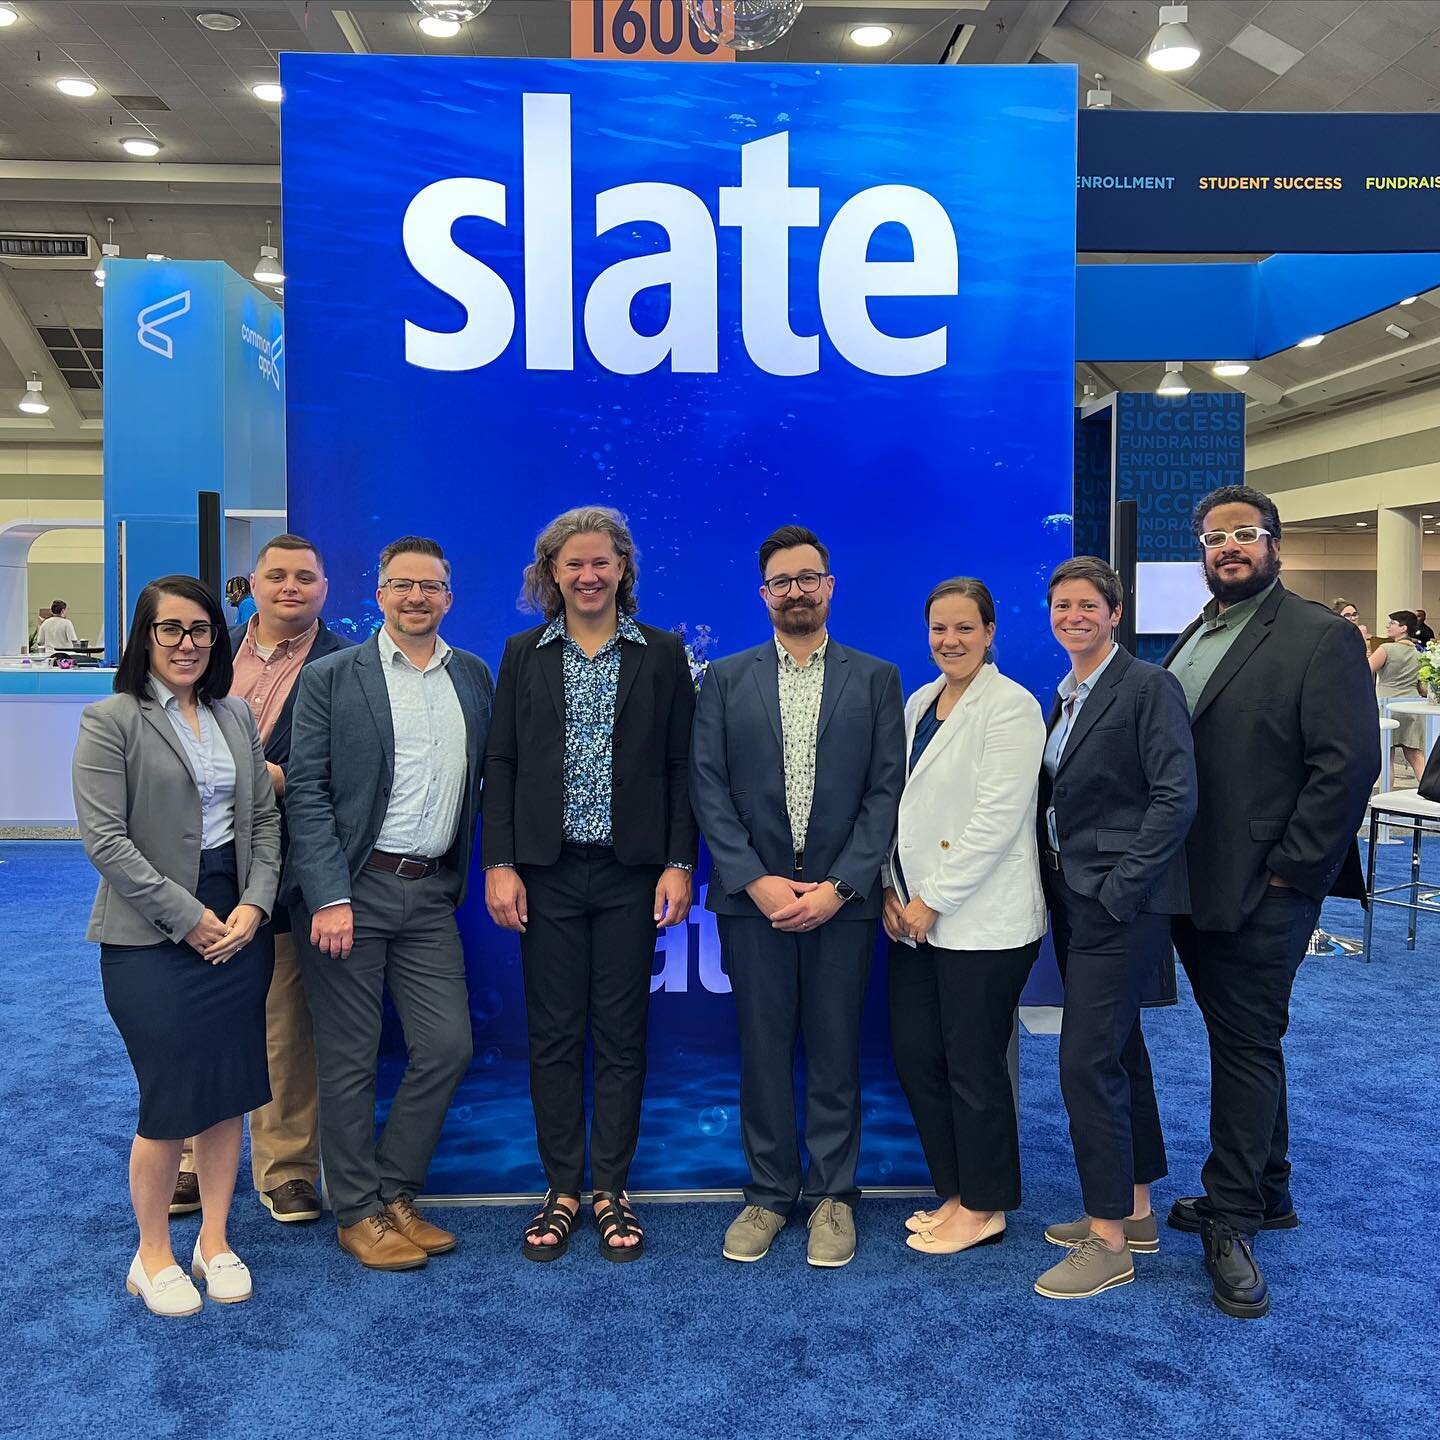 We had a great time at #NACAC23! It was wonderful seeing all our clients and partners - and did you hear about our new college search tool Start.edu? Until next time 👋 #nacac #slate #collegeaccess #collegesearch